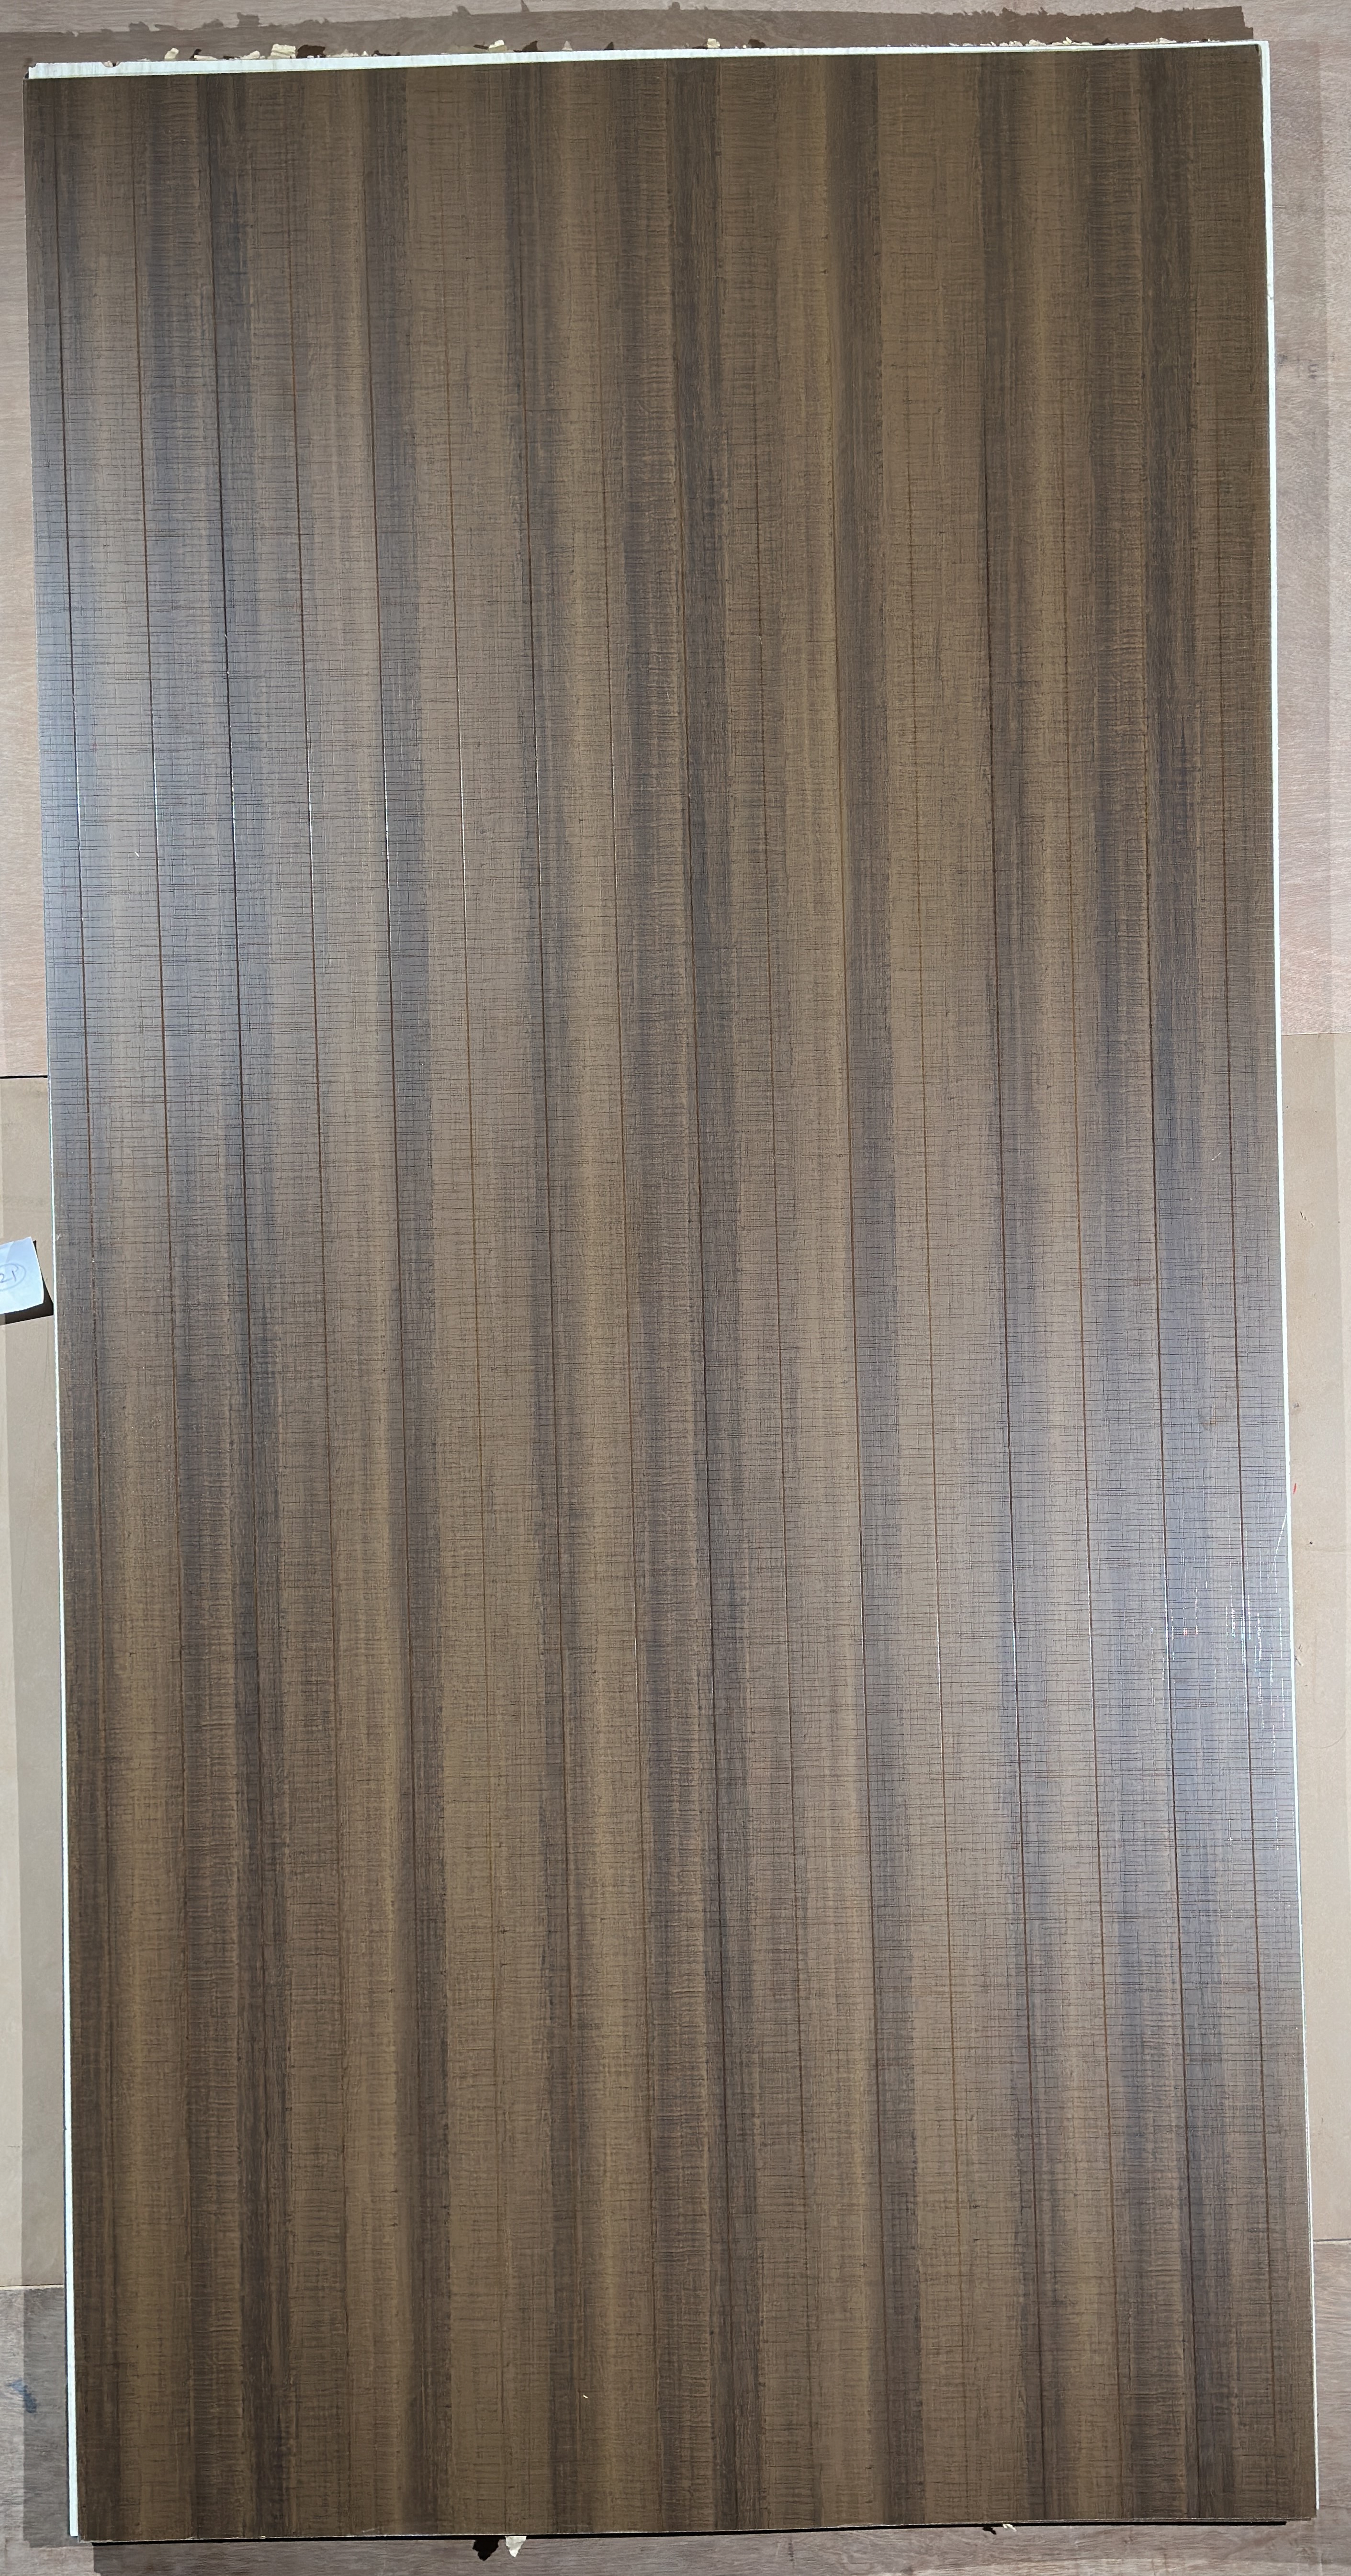 Material Depot laminates in bangalore - high quality image of a 88007 VC Brown Decorative Laminate from Pulp Decor with Texture finish